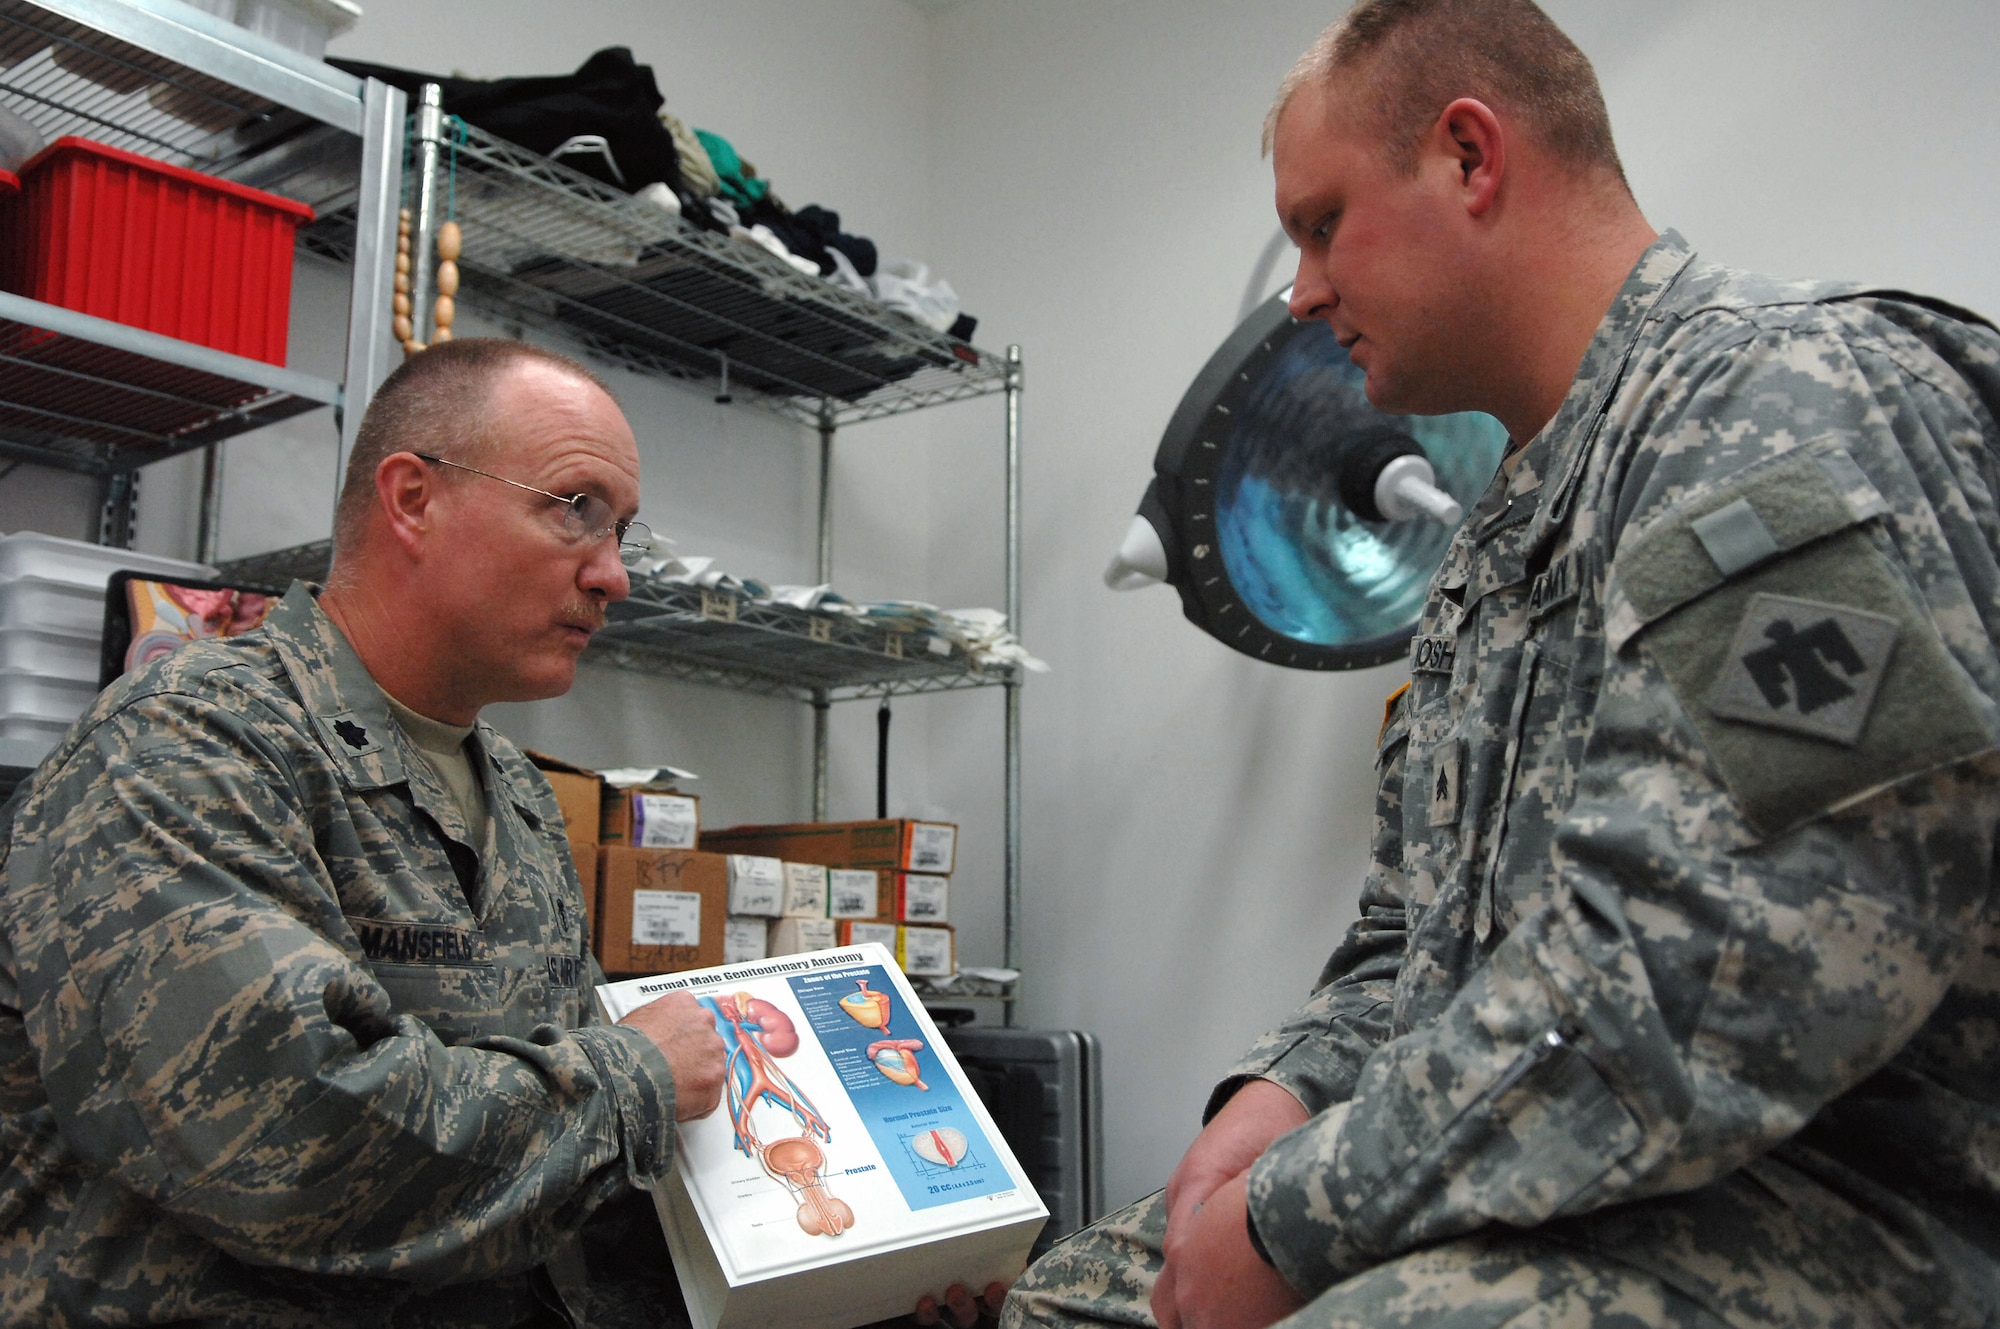 Col. (Dr.) John Mansfield discusses kidney stone disease with Army Sgt. Robert Mosher, 345th Support Battalion. Sergeant Mosher had laser surgery treatment at the Air Force Theater Hospital at Balad Air Base, Iraq, to remove a kidney stone. He was away from his unit at Camp Cropper, Iraq, for seven days while he was receiving treatment and recovering. Doctor Mansfield is a 332nd Expeditionary Medical Operations Squadron urologist.  (U.S. Air Force photo/Senior Airman Julianne Showalter)